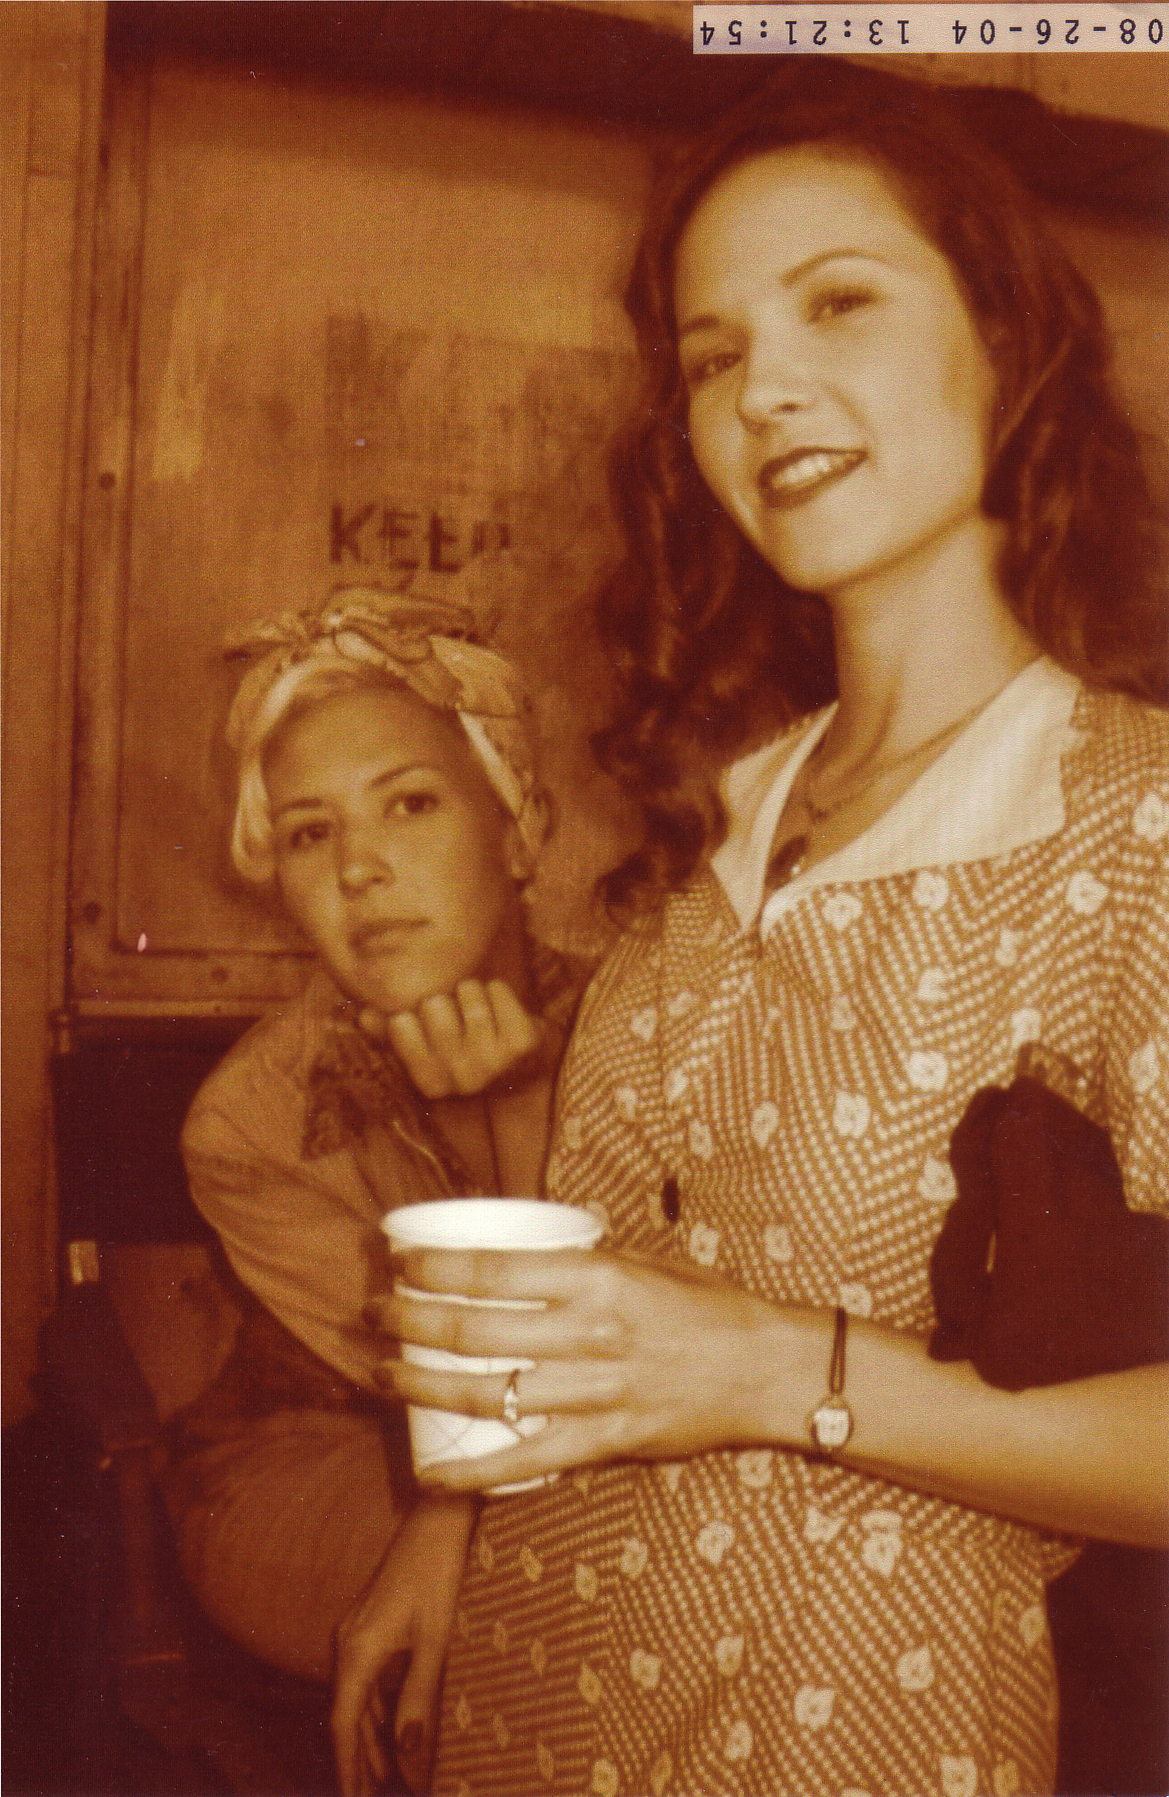 Stacey Scowley (left), on set during the filming of the 